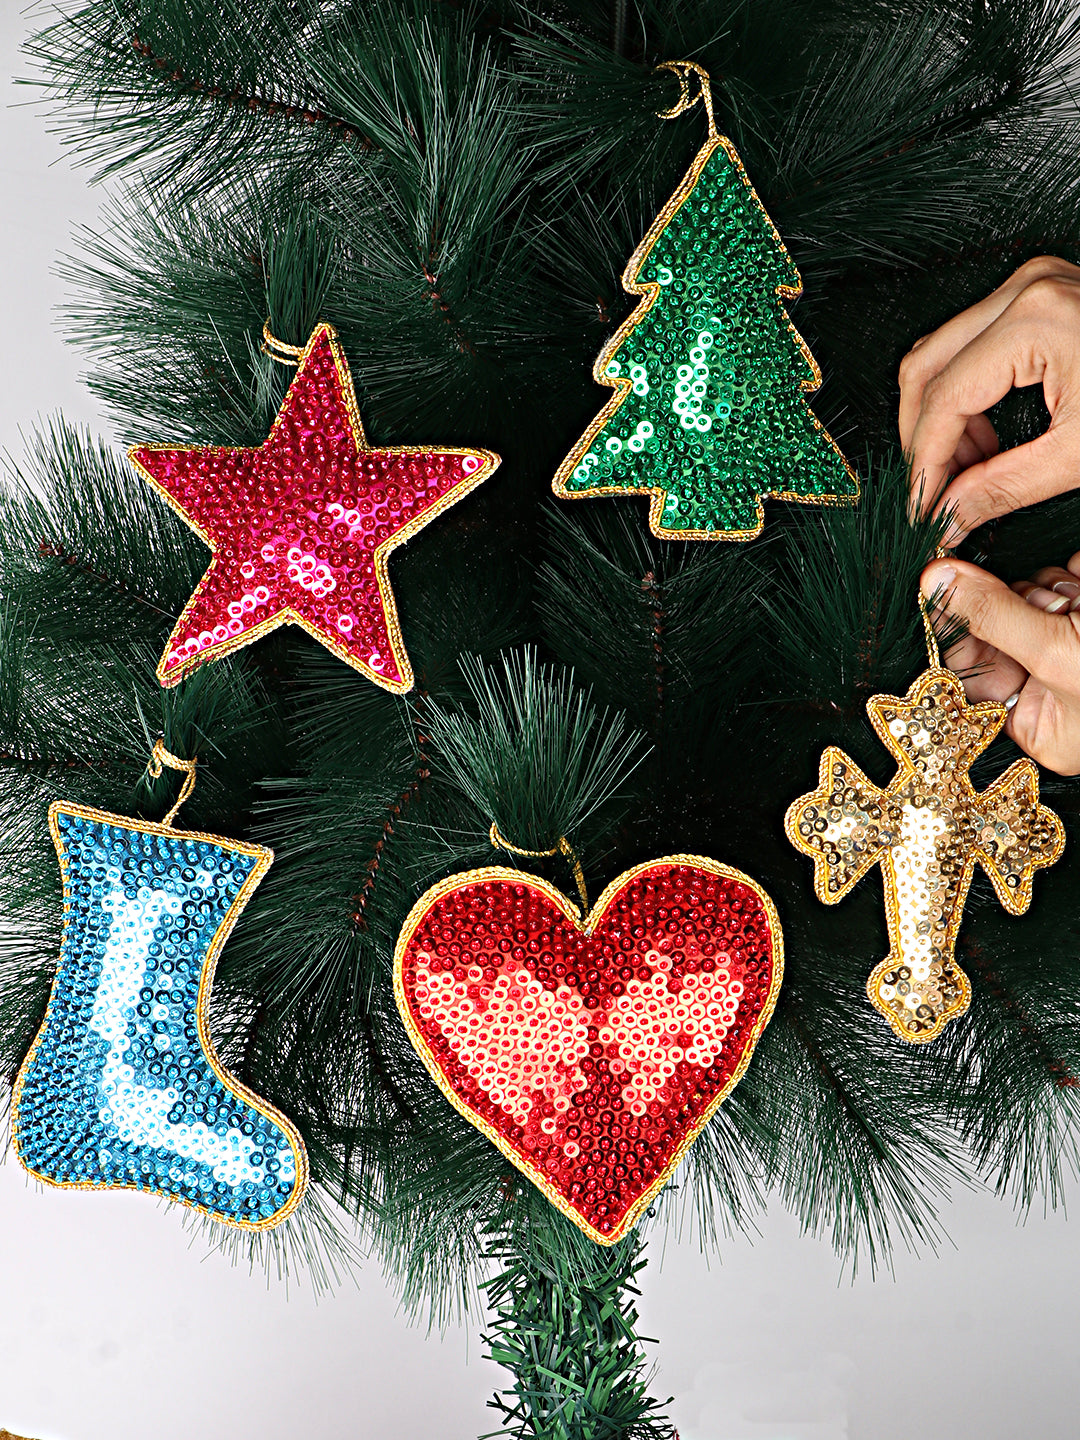 Sparkling Charm - Stars, Hearts, Cross, Shoe & tree Christmas ornaments set of 5 pieces for holiday decor (1SET=5PC)